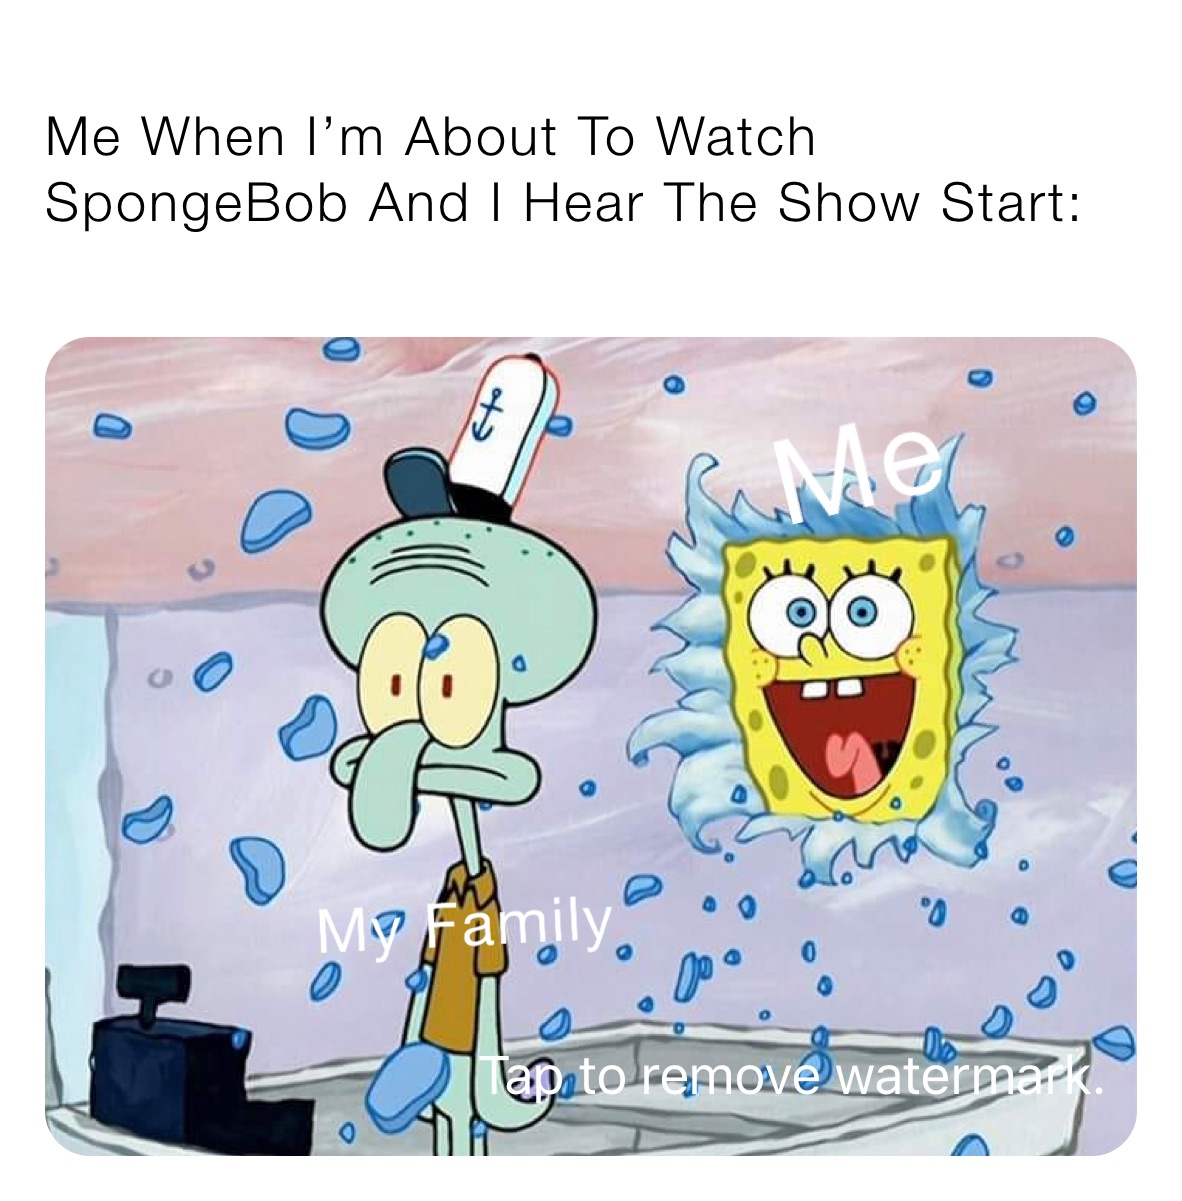 Me When I’m About To Watch SpongeBob And I Hear The Show Start: